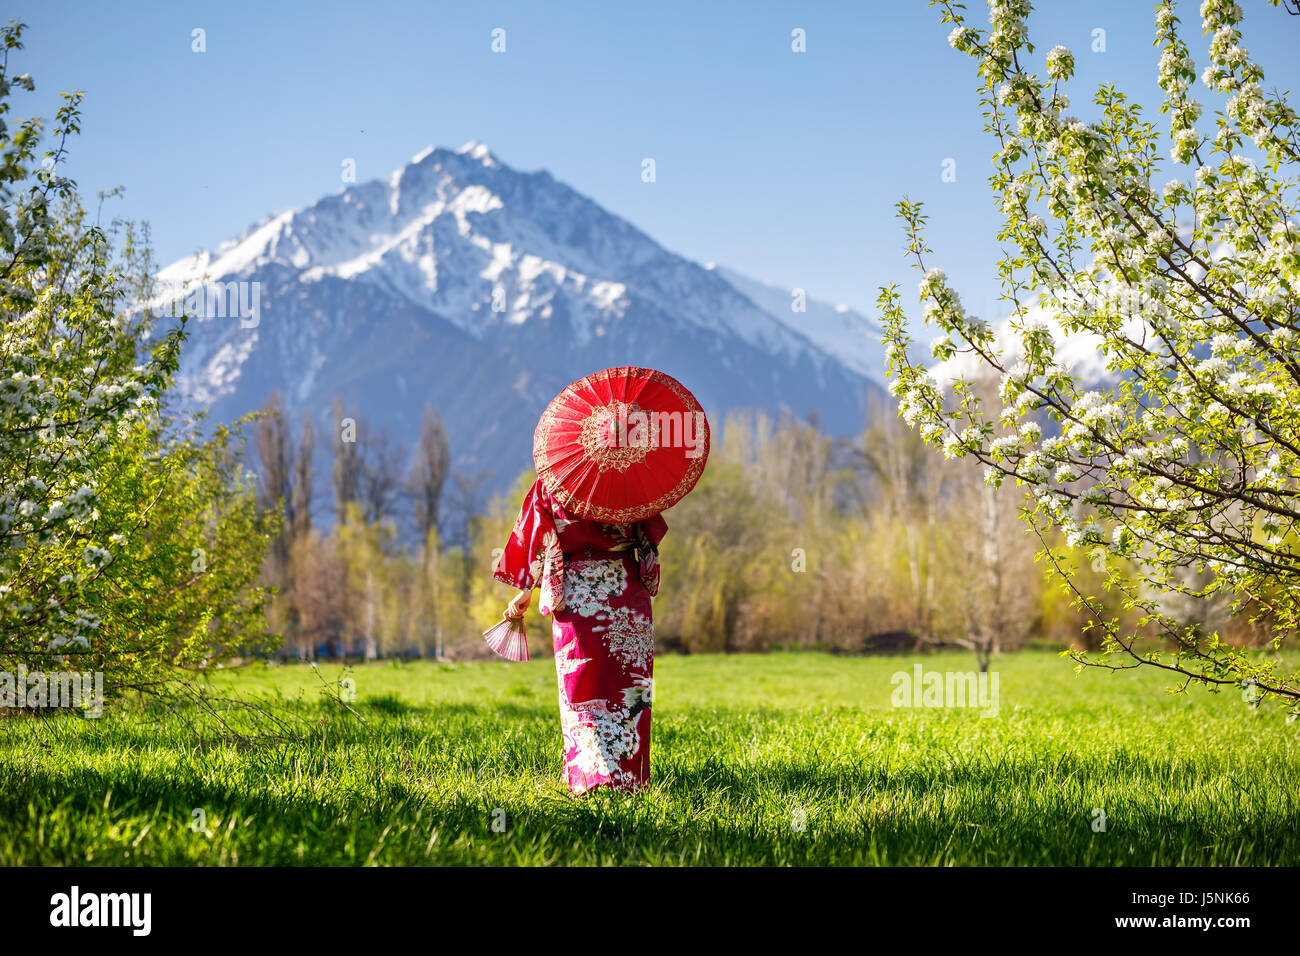 Woman in kimono with red umbrella in the garden with cherry blossom at mountain background Stock Photo